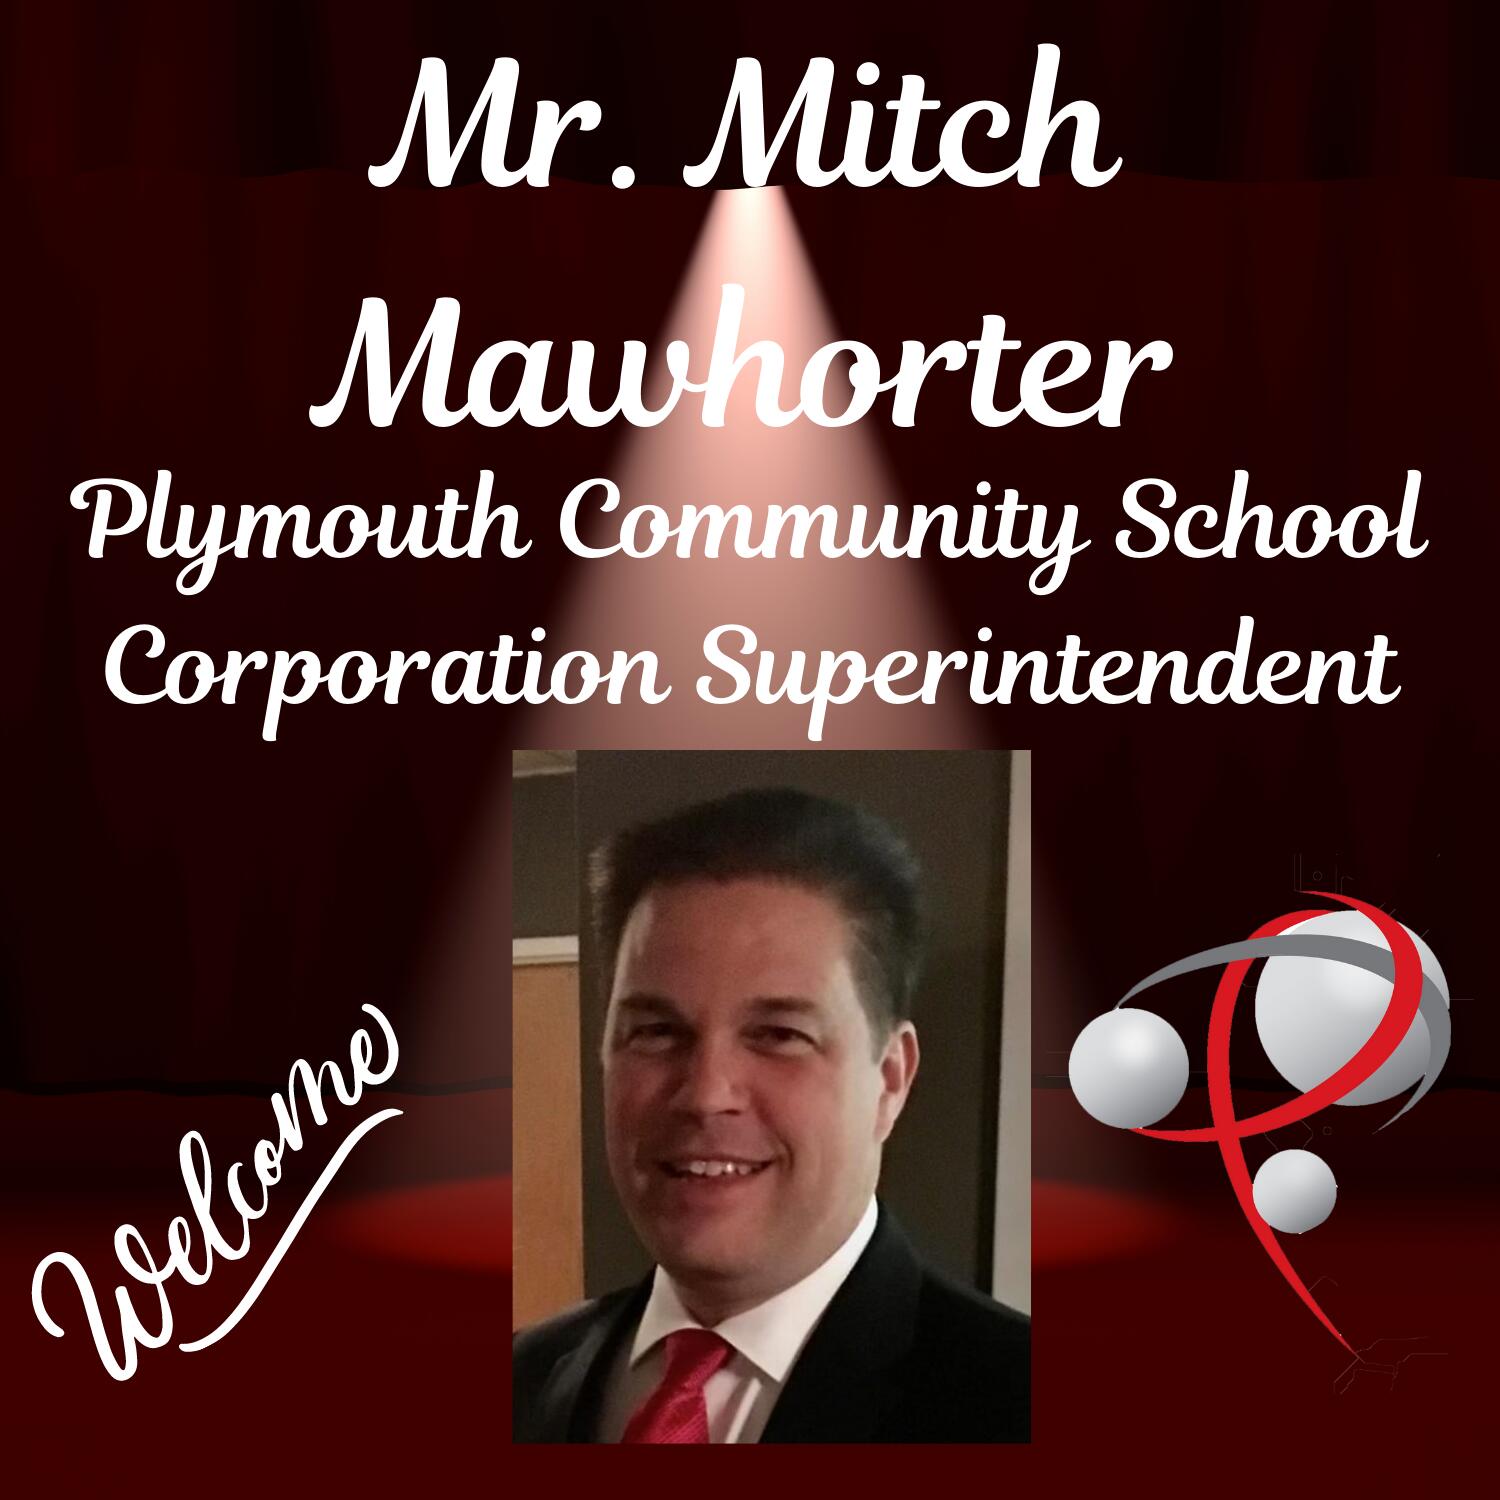 Mr. Mitch Mawhorter Plymouth Community School Corporation Superintendent Welcome Picture